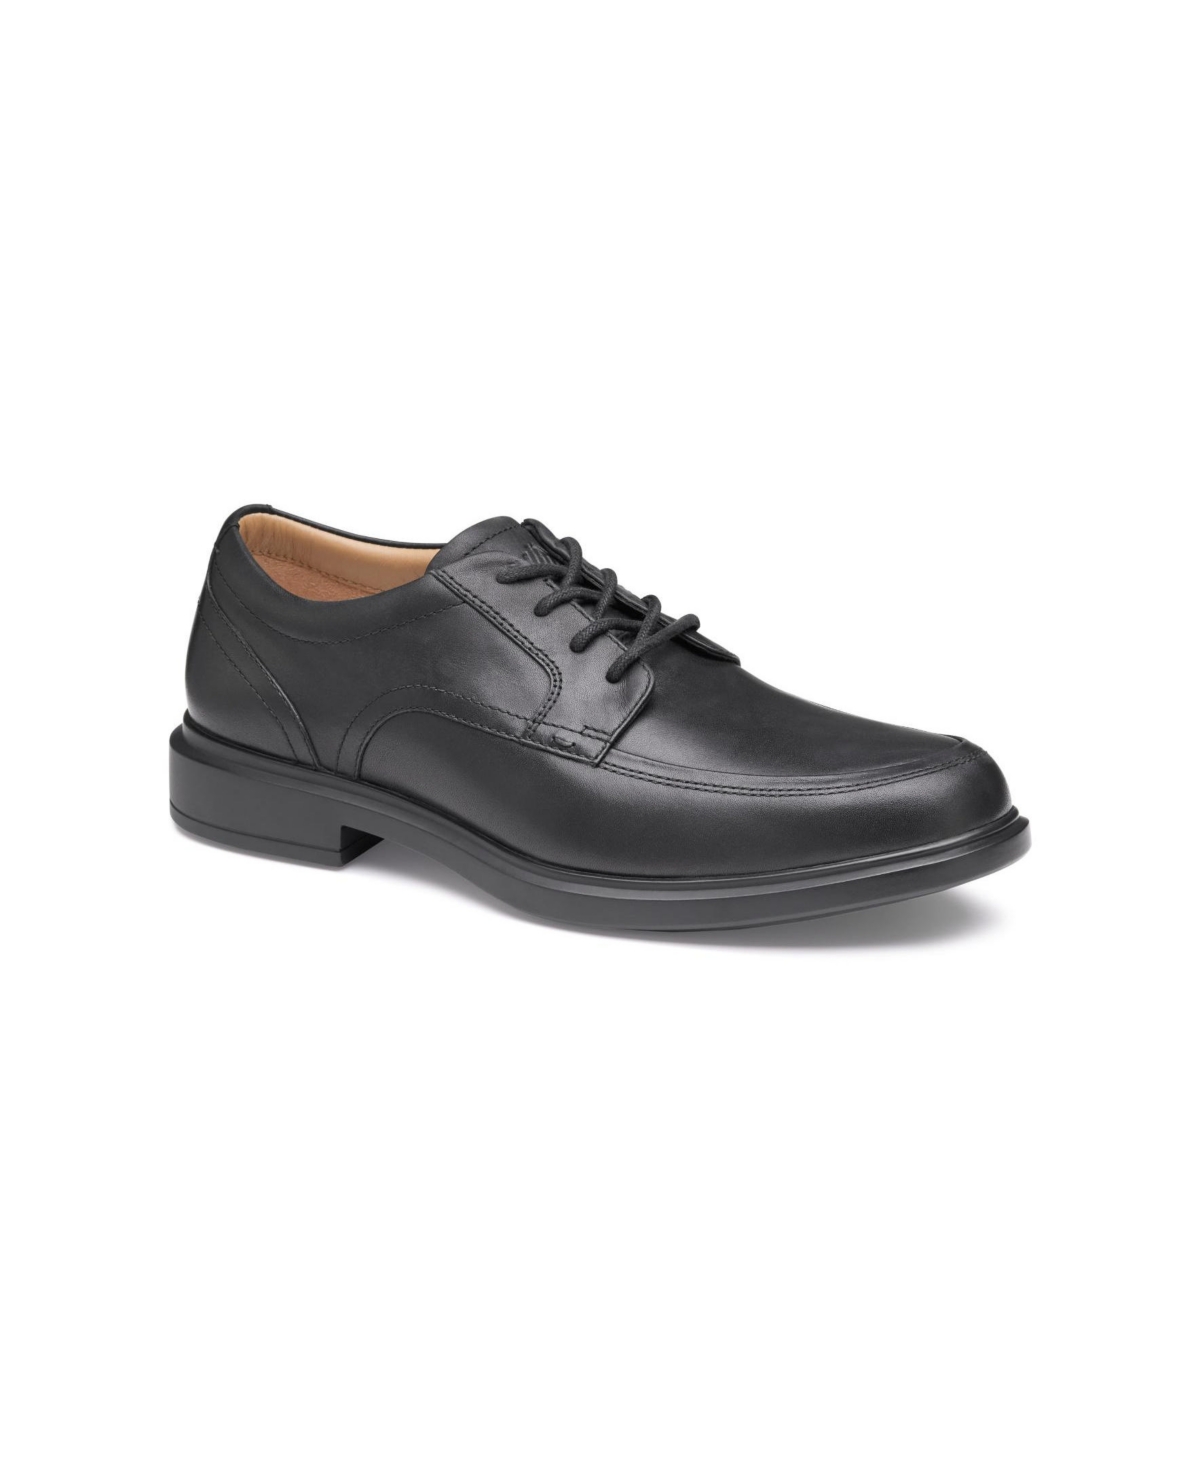 Johnston & Murphy Men's Xc4 Stanton 2.0 Runoff Waterproof Leather Lace-up Oxford Shoes In Black Full Grain Leather